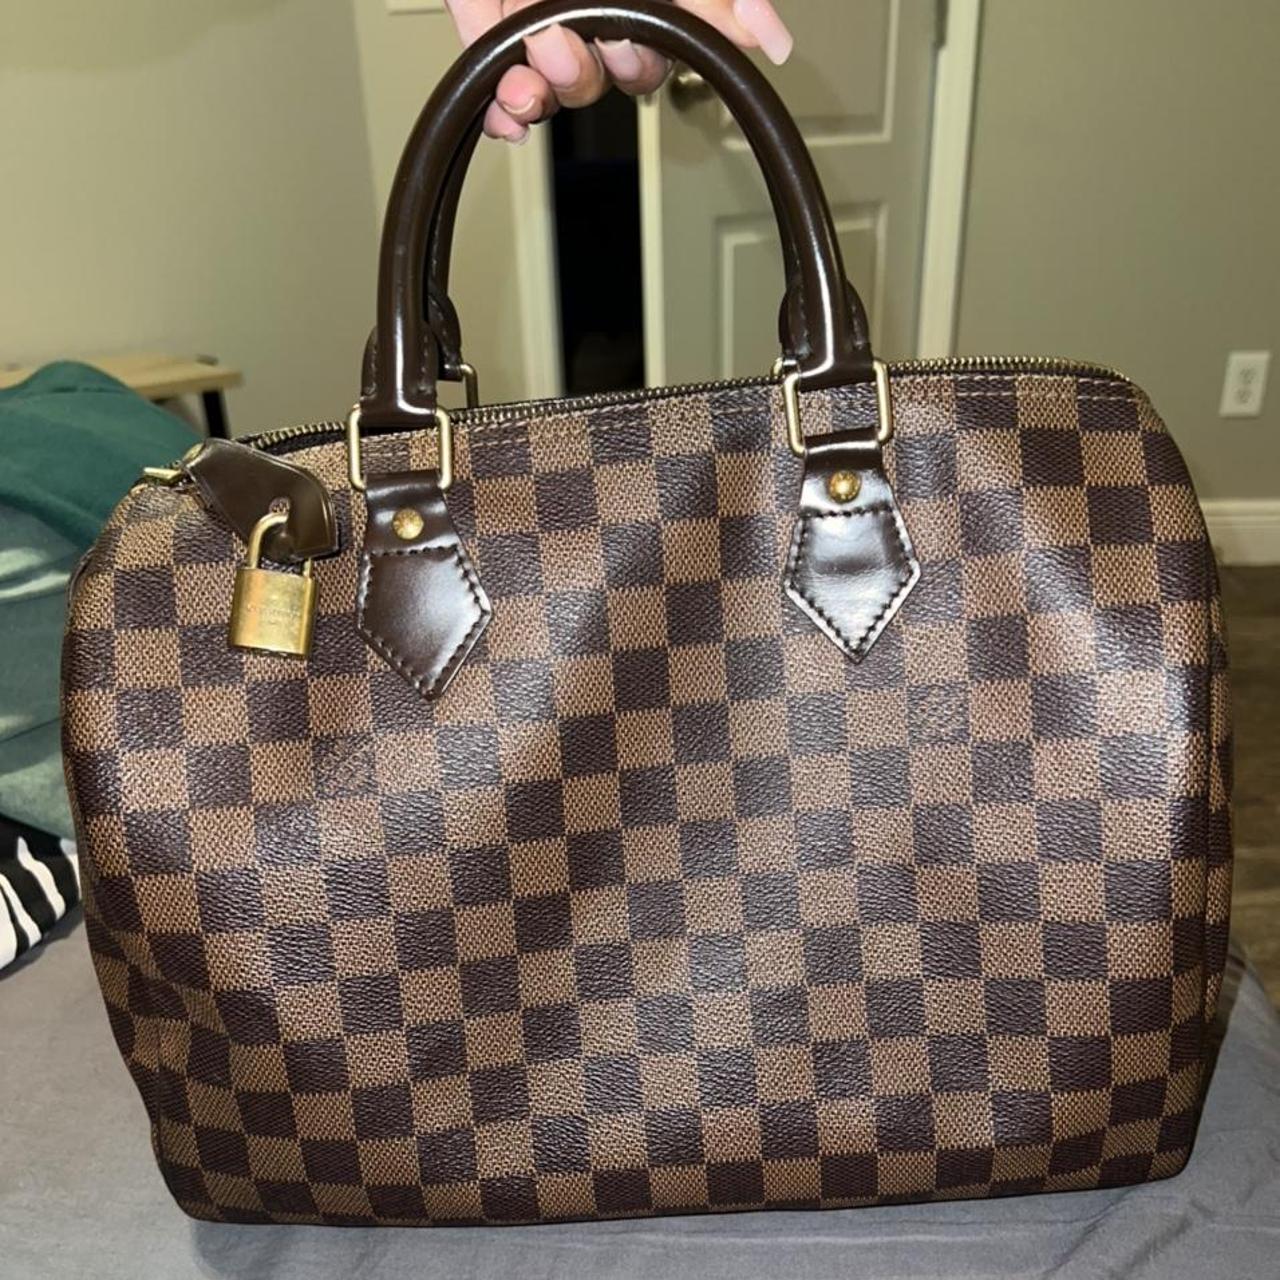 Is this Louis Vuitton bag real? : r/Depop